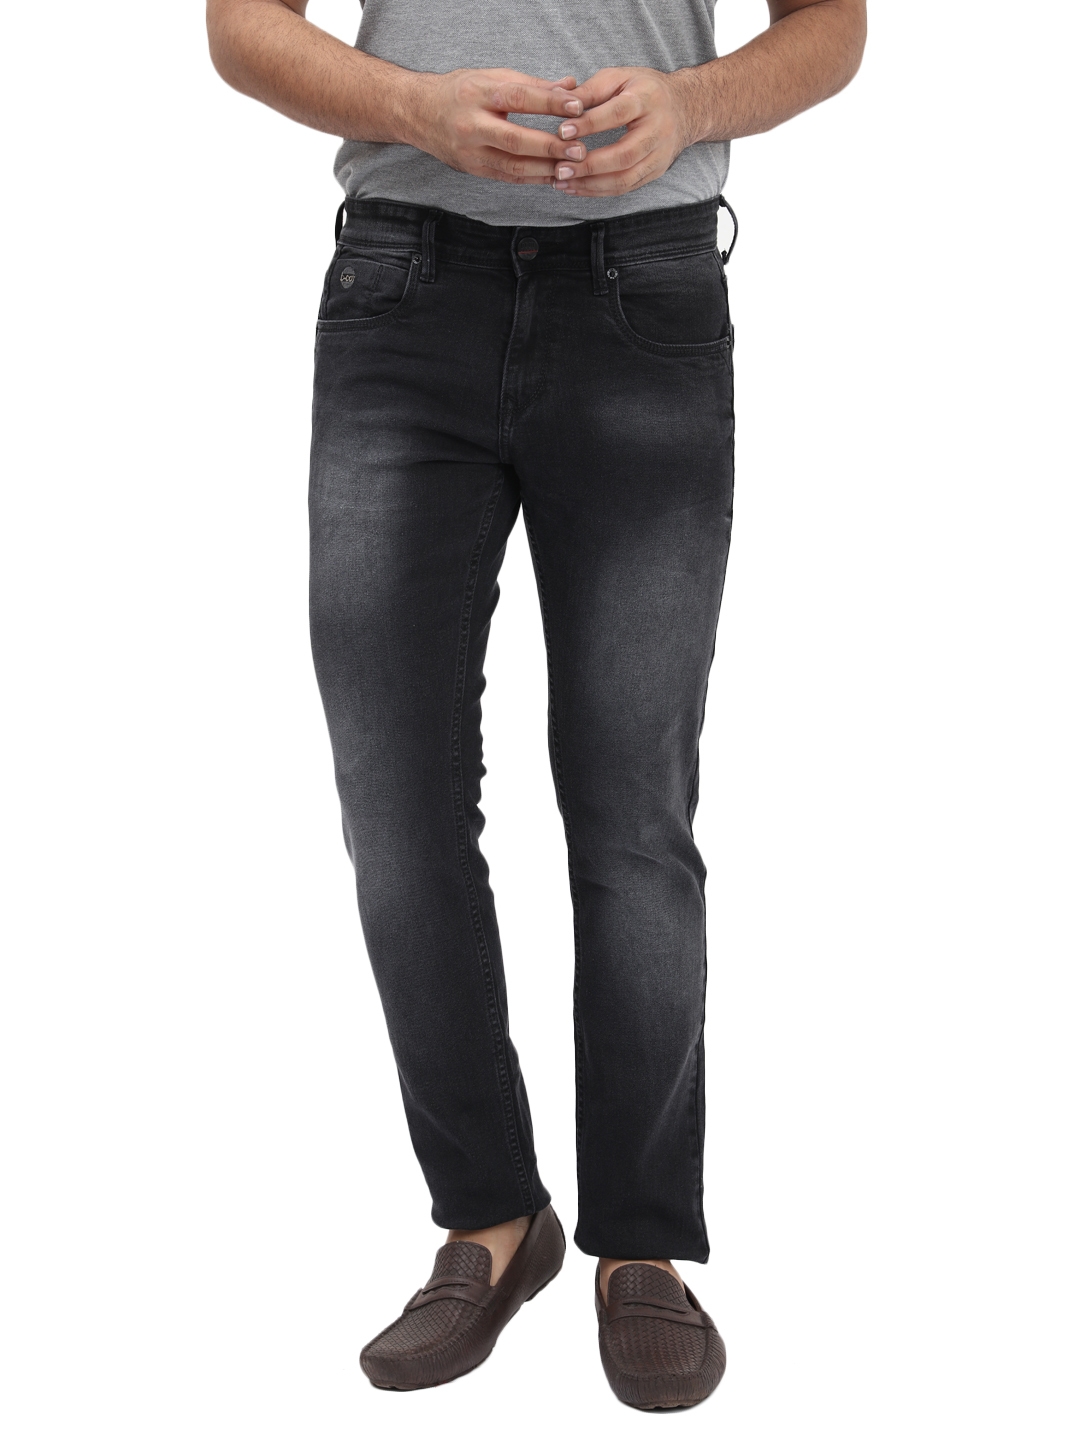 D'cot by Donear | D'cot by Donear Mens Black Cotton Jeans